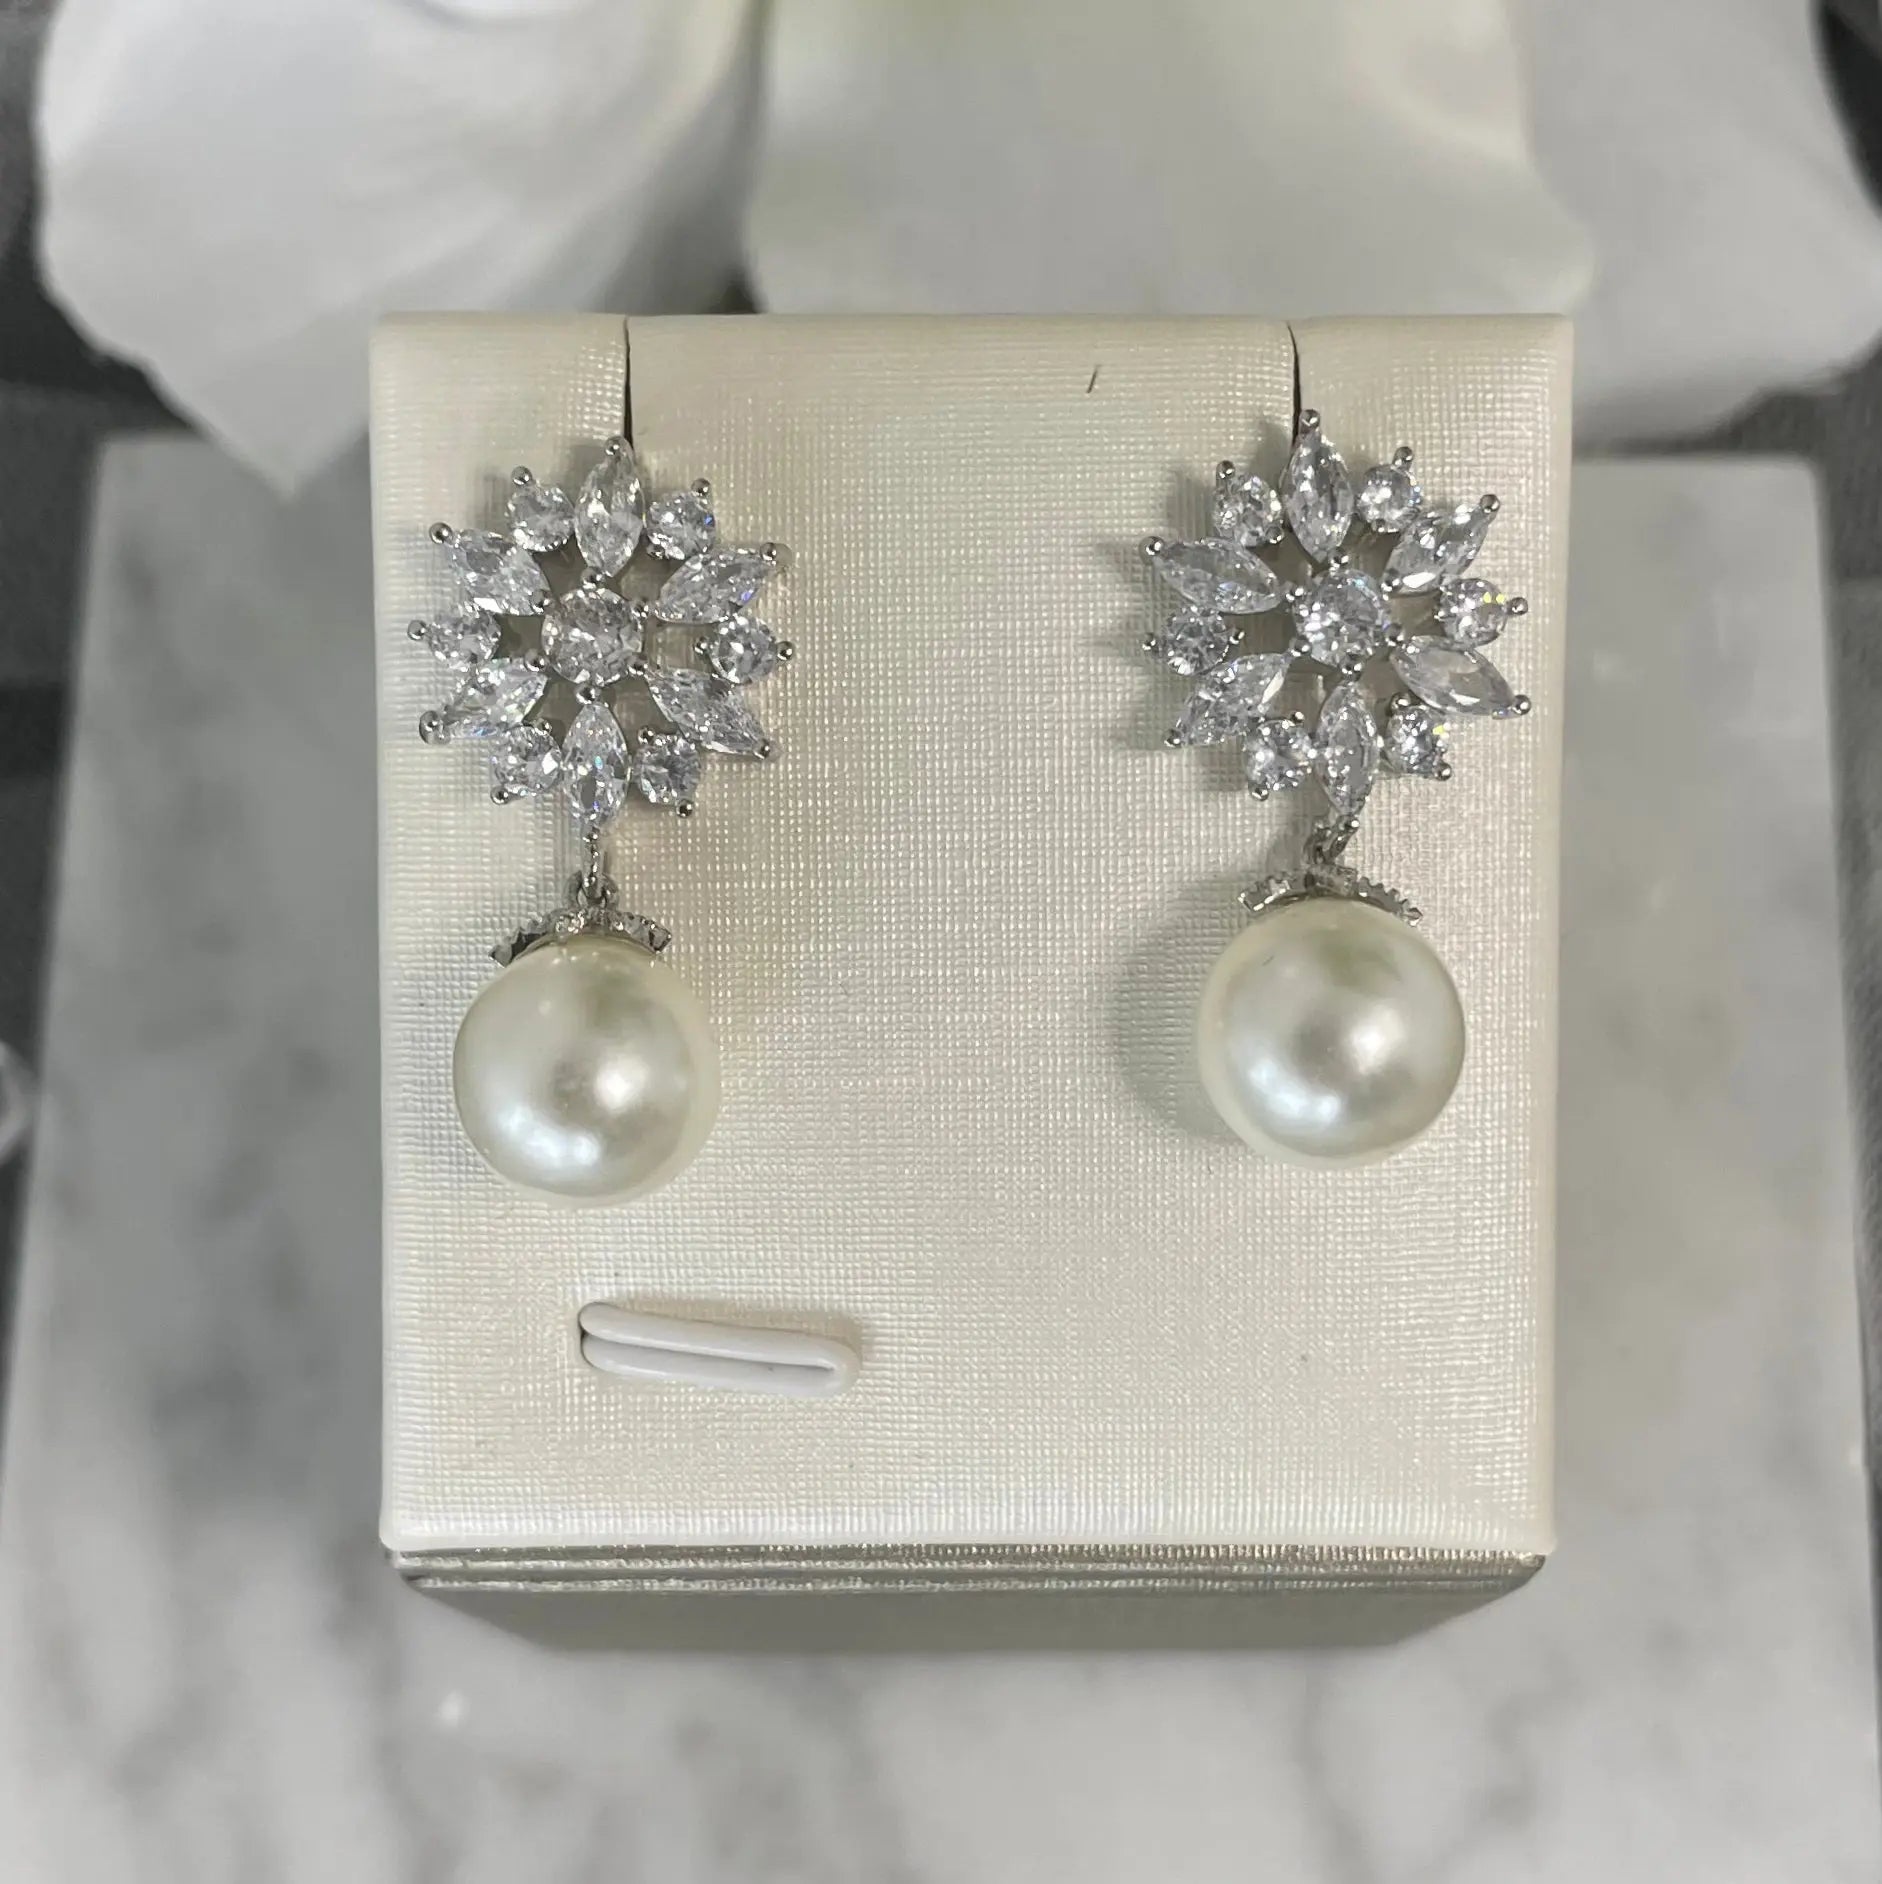 Pipa crystal pearl earrings featuring floral-inspired round crystals and a secure pearl drop, crafted in high-quality copper and zircon, available in gold and silver plating.